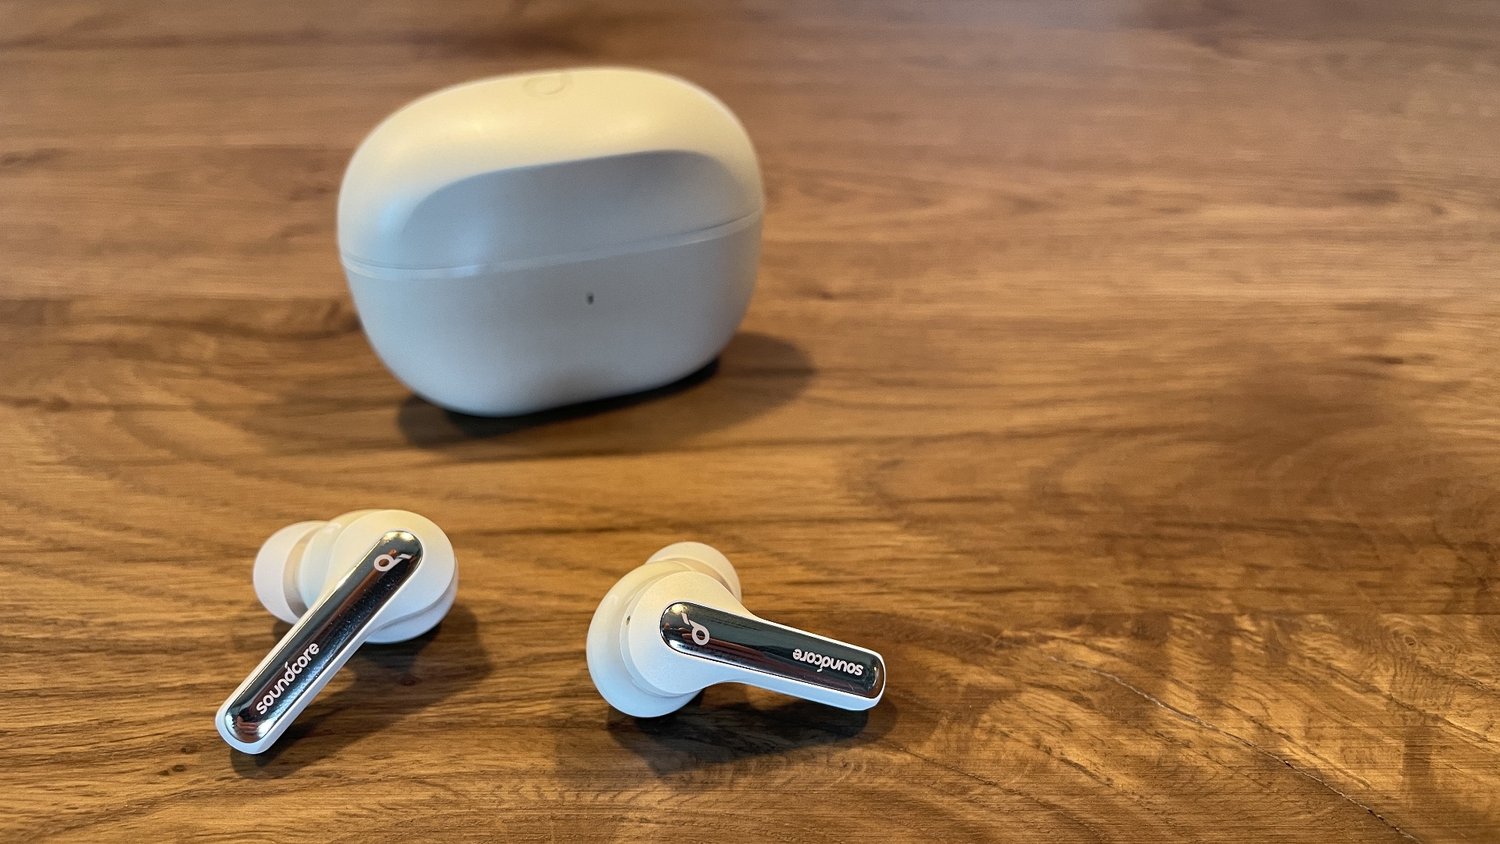 Anker Soundcore Life P3 vs Anker SoundCore P3i: What is the